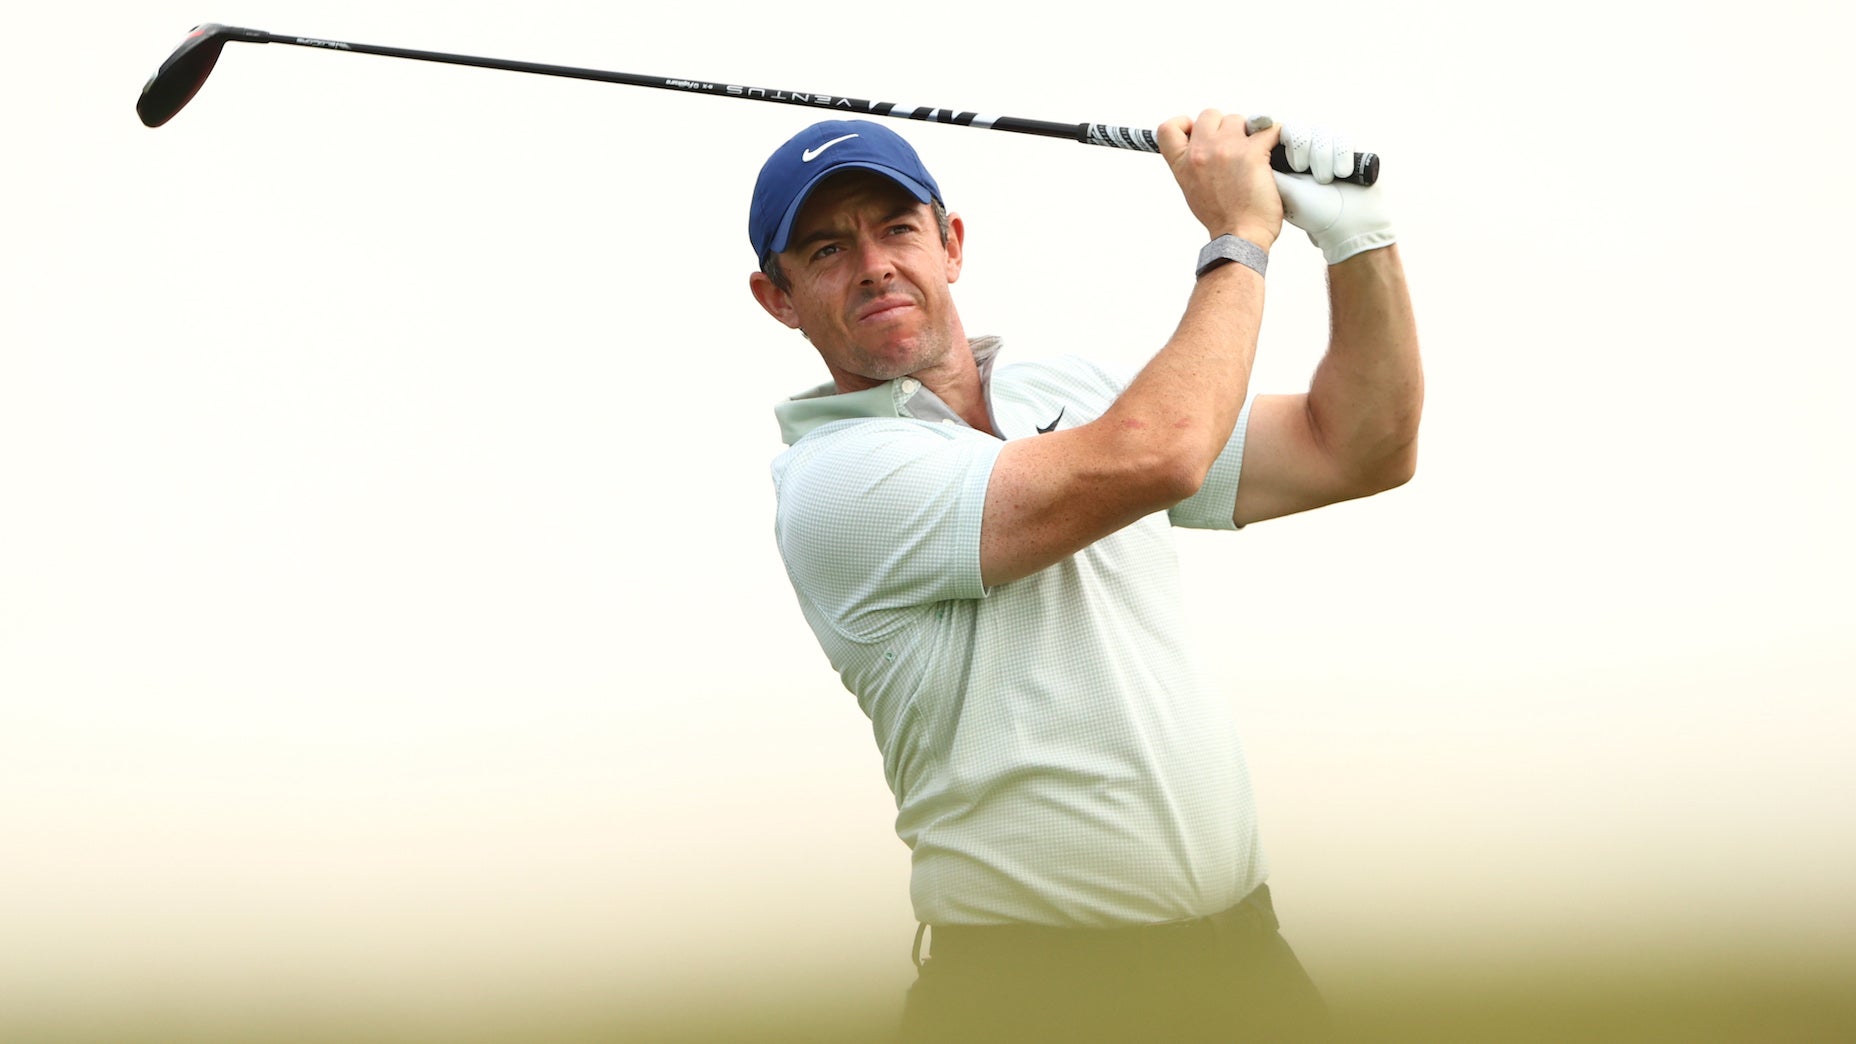 Rory McIlroy hopes to hit more fairways this season – even if that means calling him back on some holes.